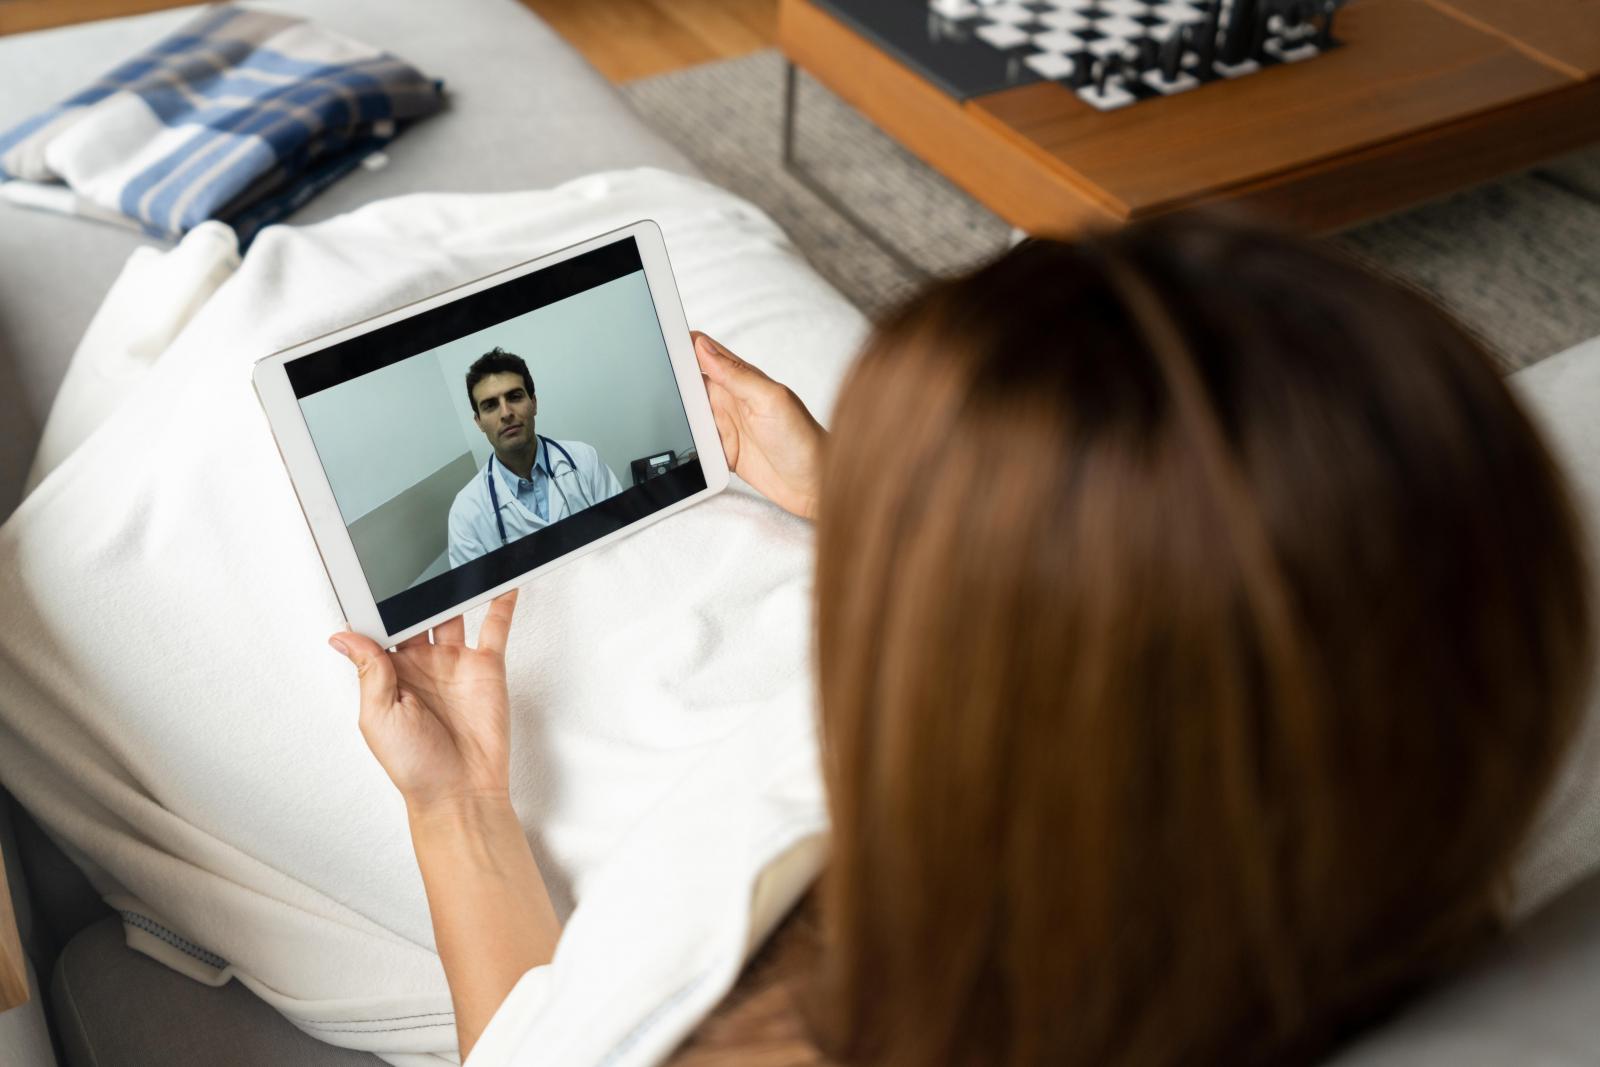 are telehealth visits recorded